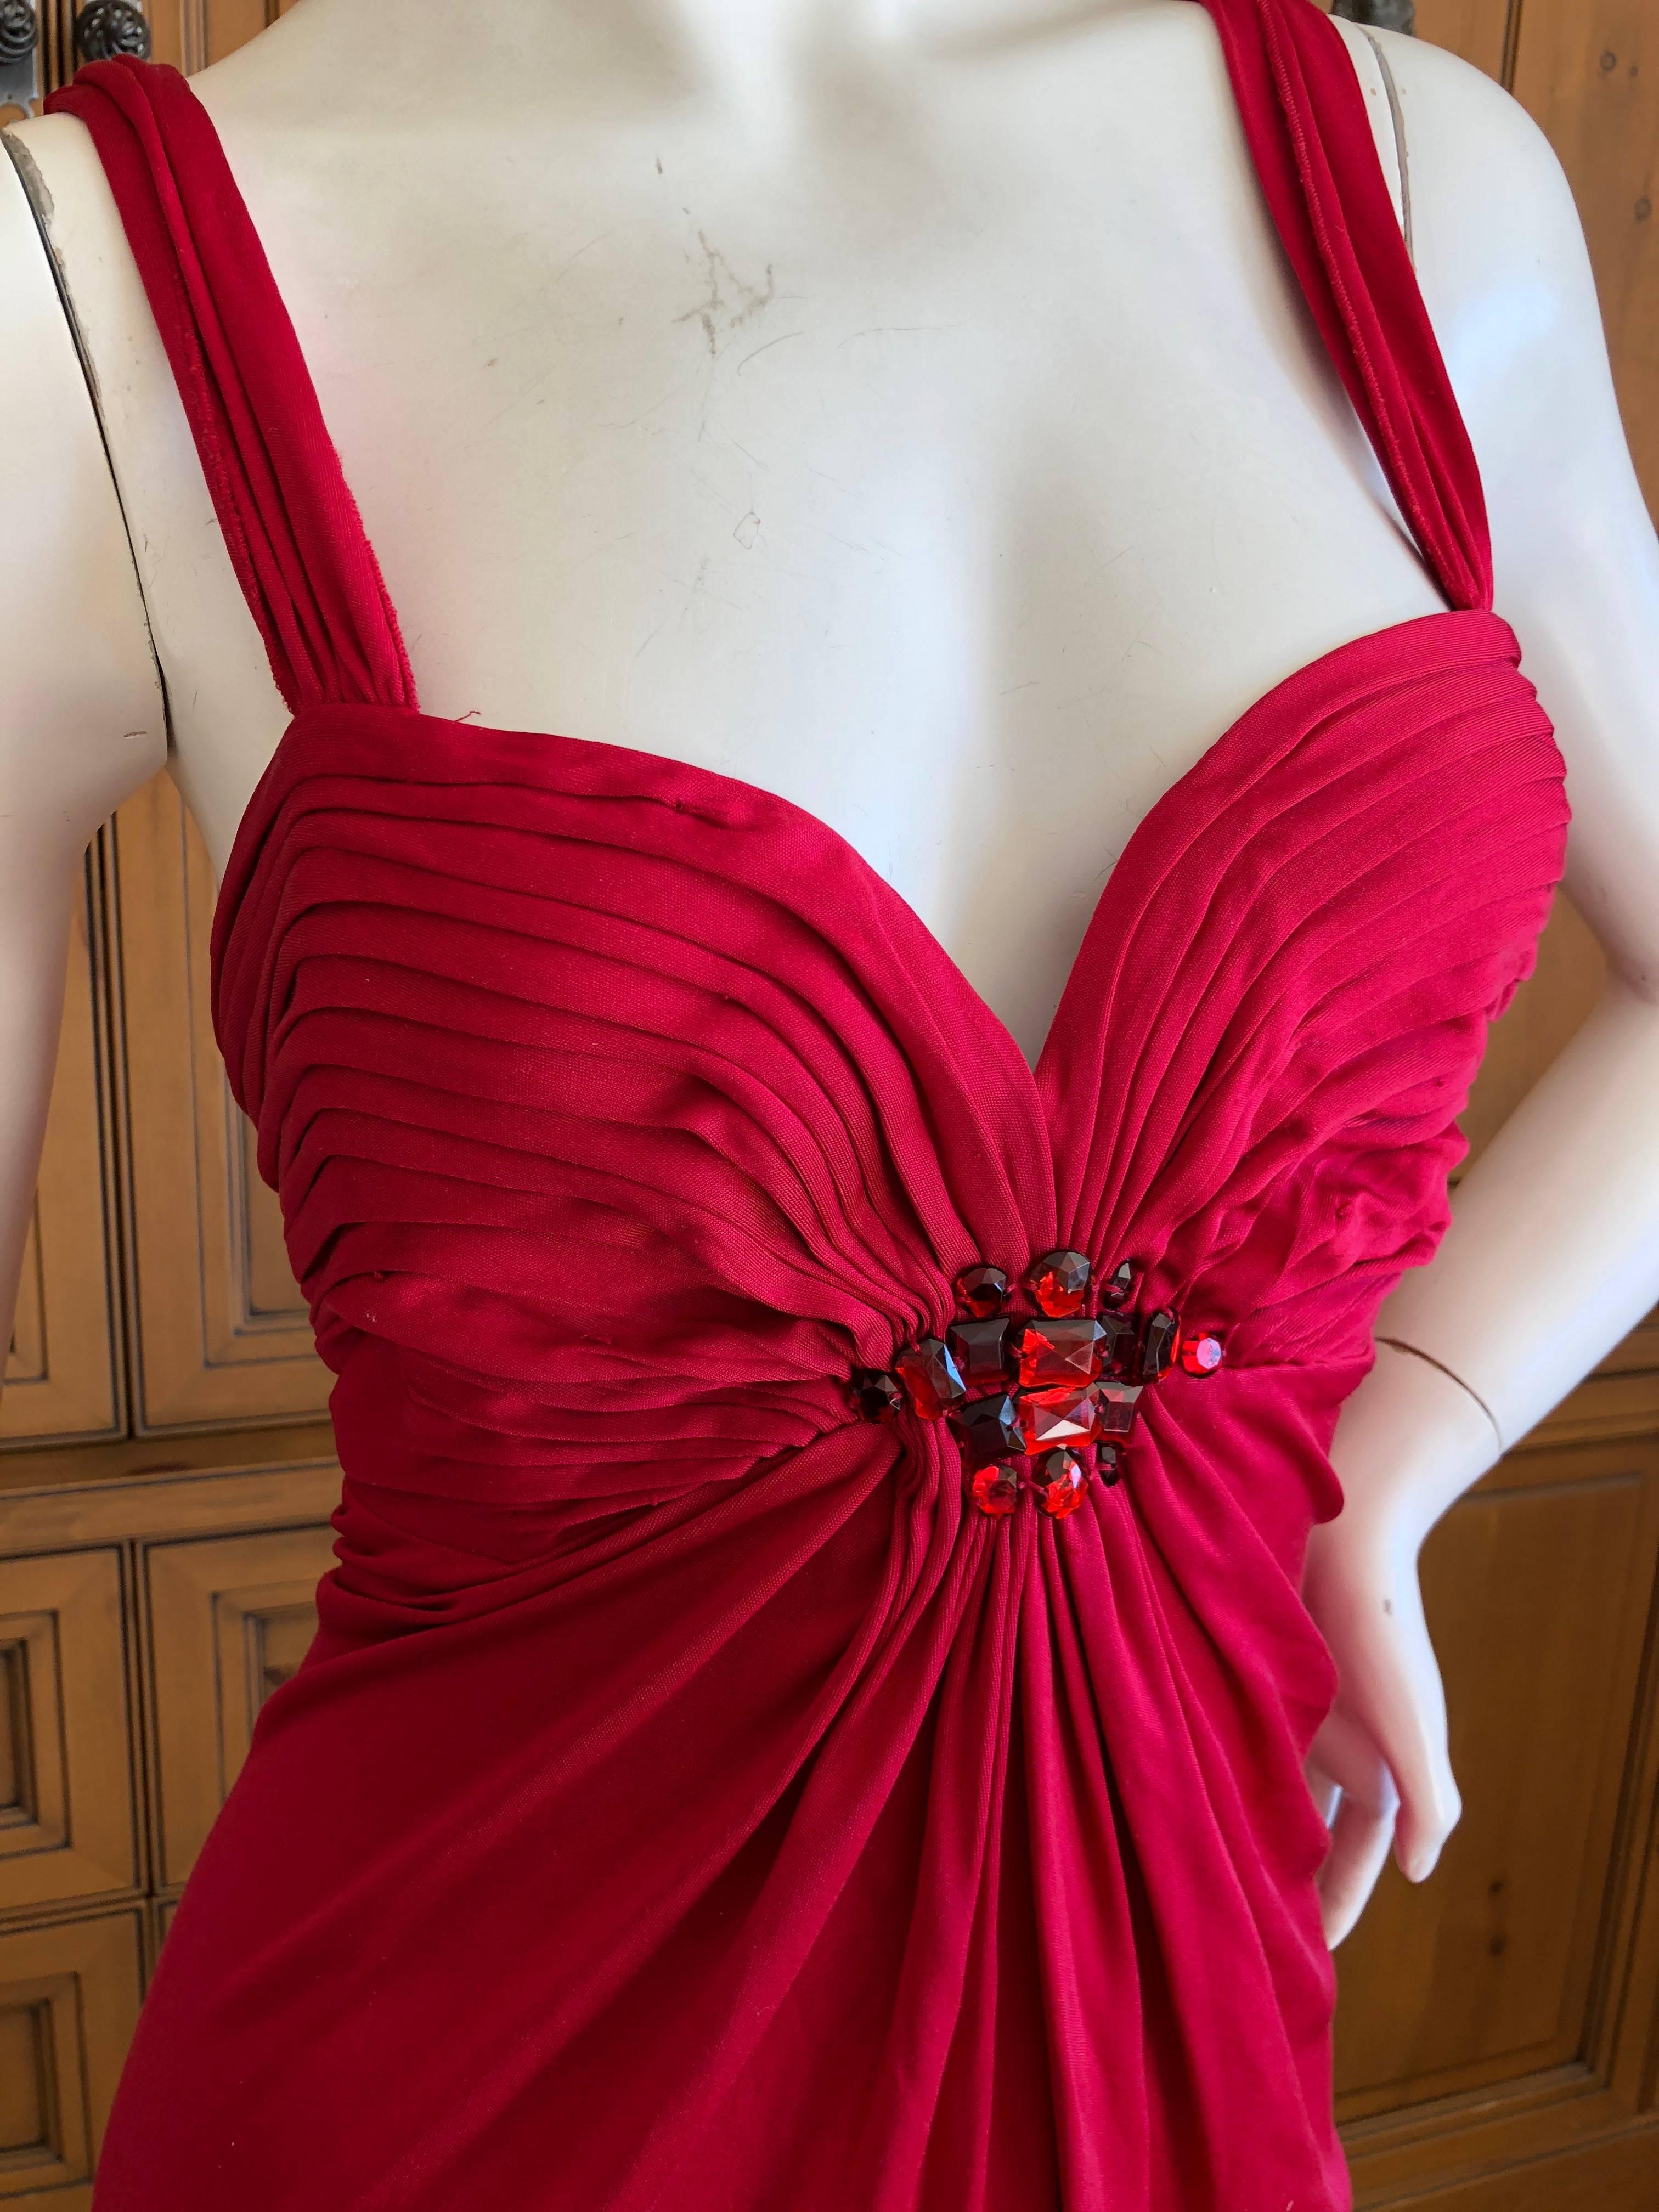 Christian Dior Crystal Embellished Red Cocktail Dress  In Excellent Condition For Sale In Cloverdale, CA